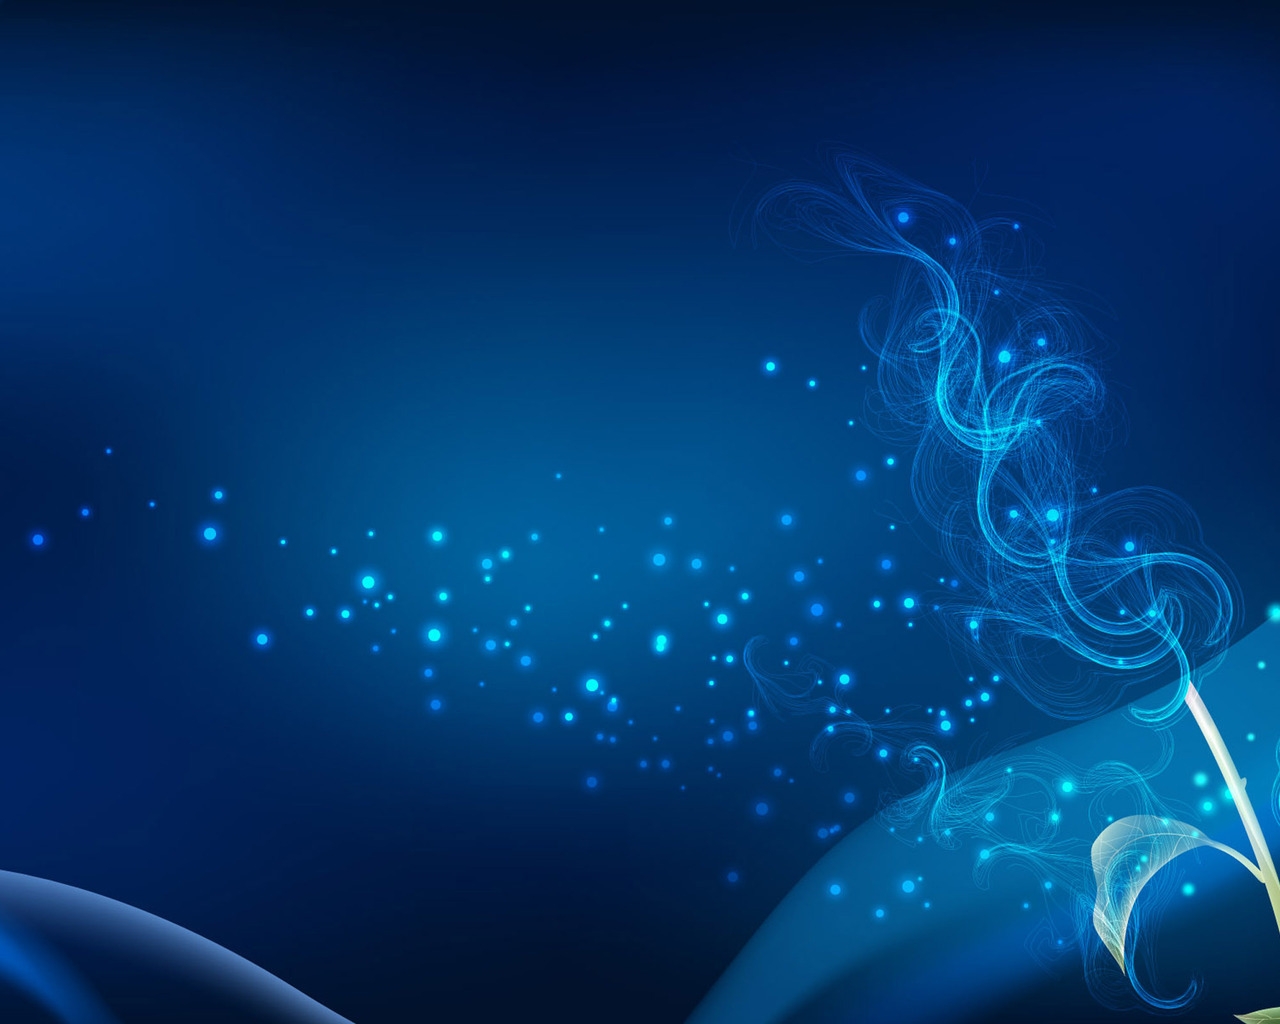 Blue Abstract Fractal for 1280 x 1024 resolution